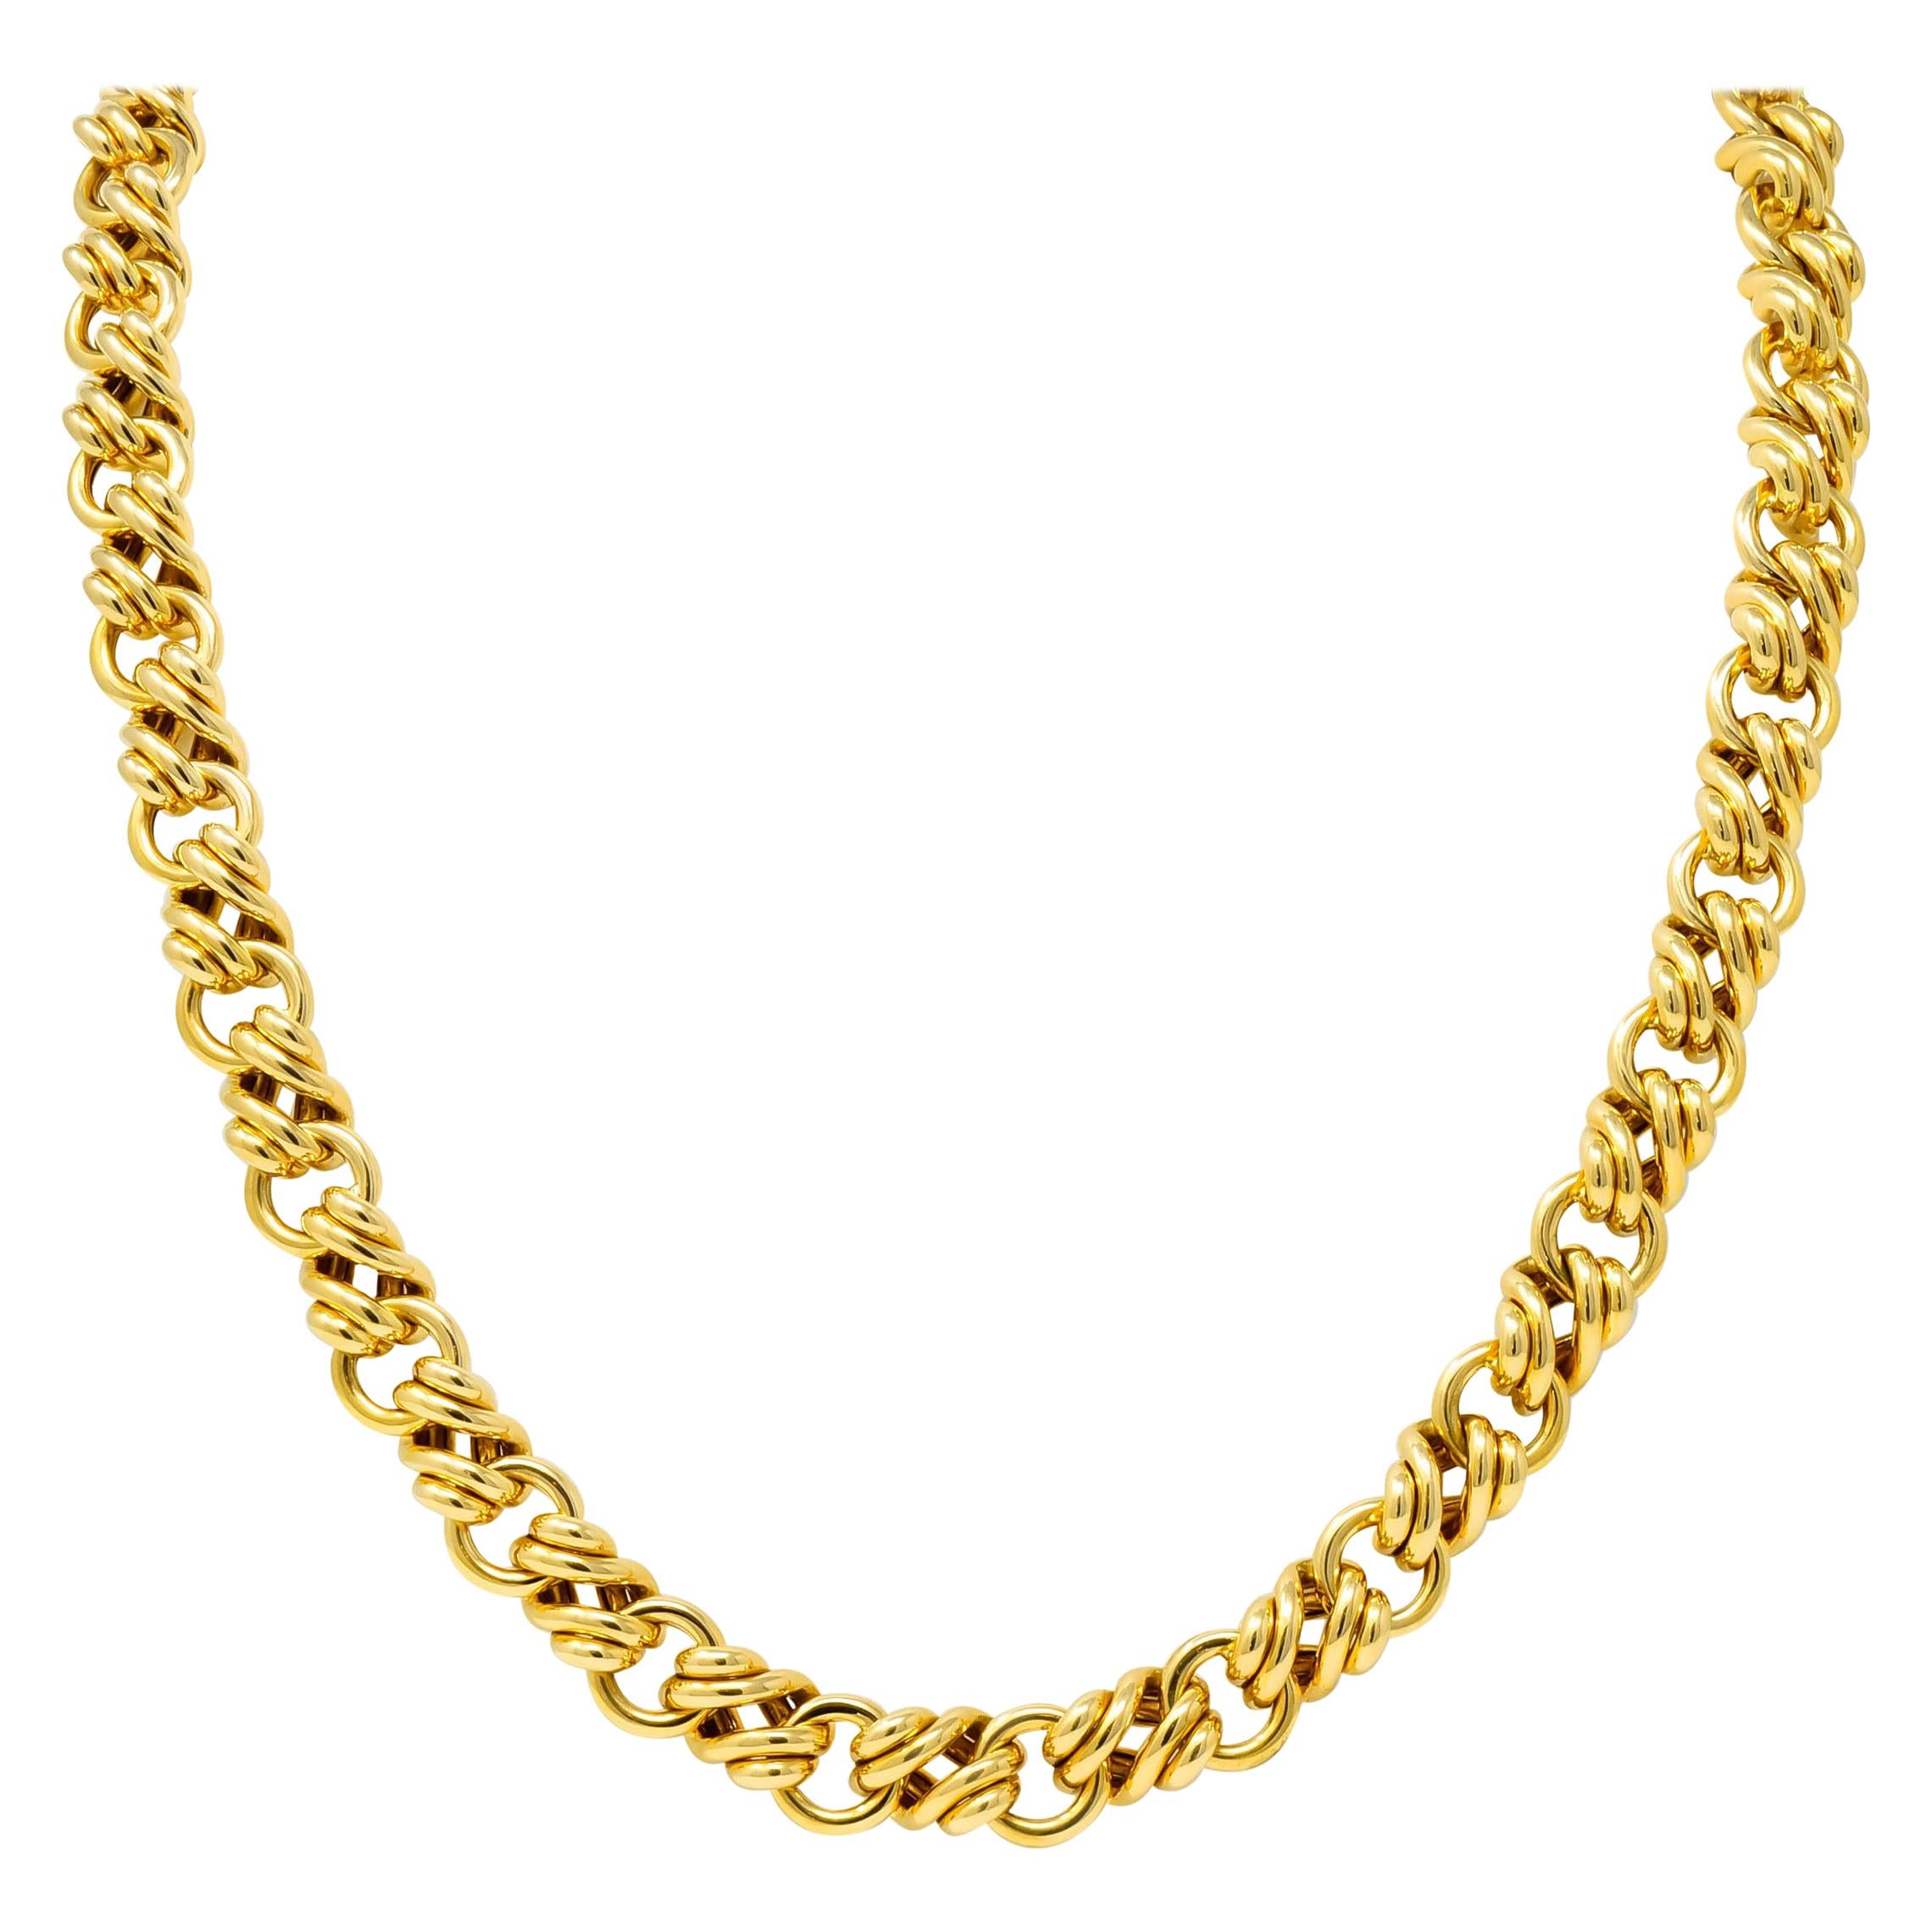 Tiffany & Co. Vintage 18 Karat Yellow Gold Substantially Linked Chain Necklace